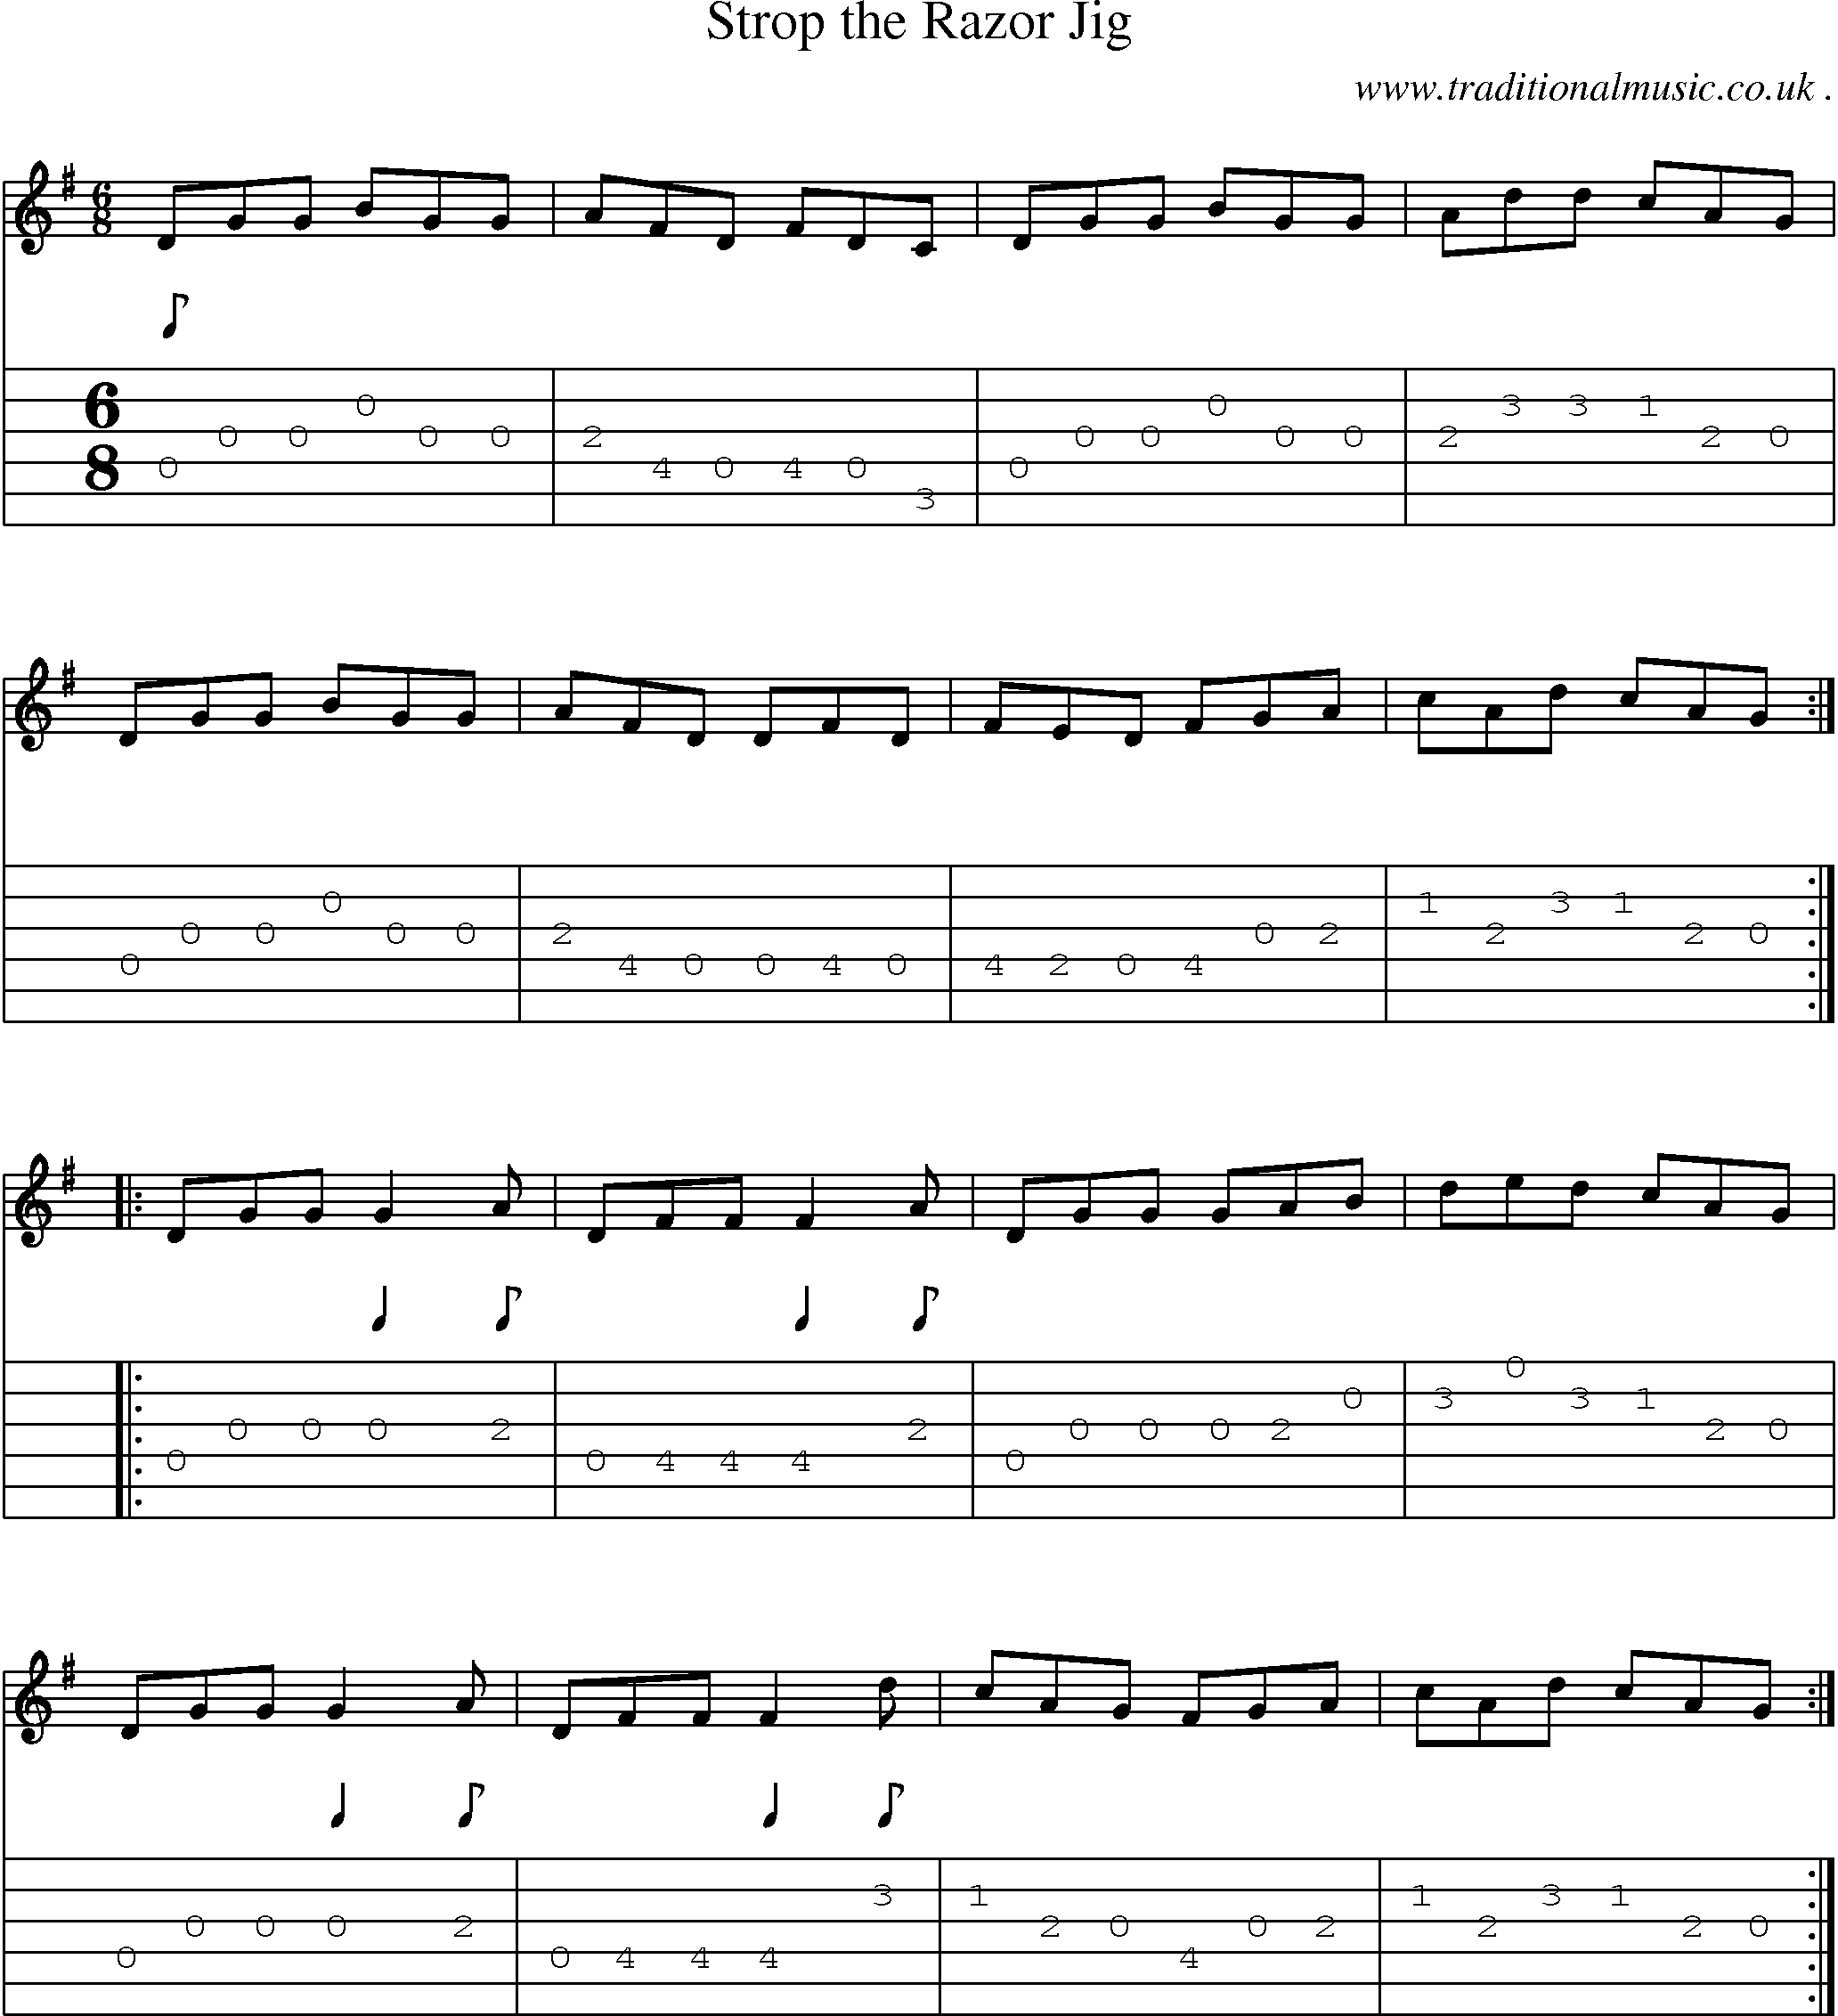 Sheet-Music and Guitar Tabs for Strop The Razor Jig